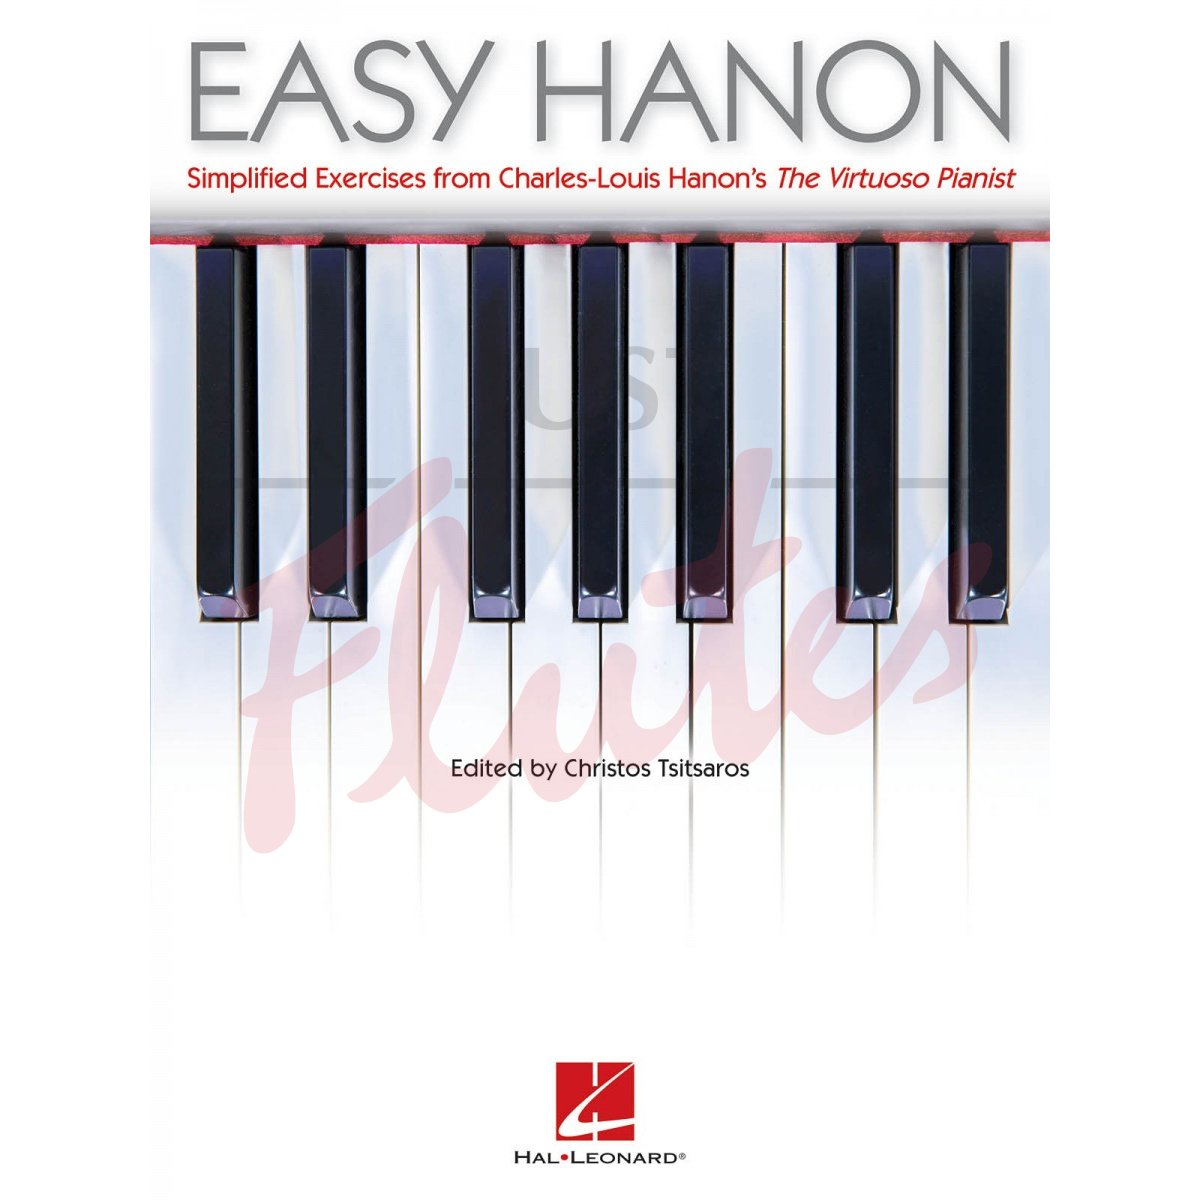 Easy Hanon - Simplified Exercises from The Virtuoso Pianist